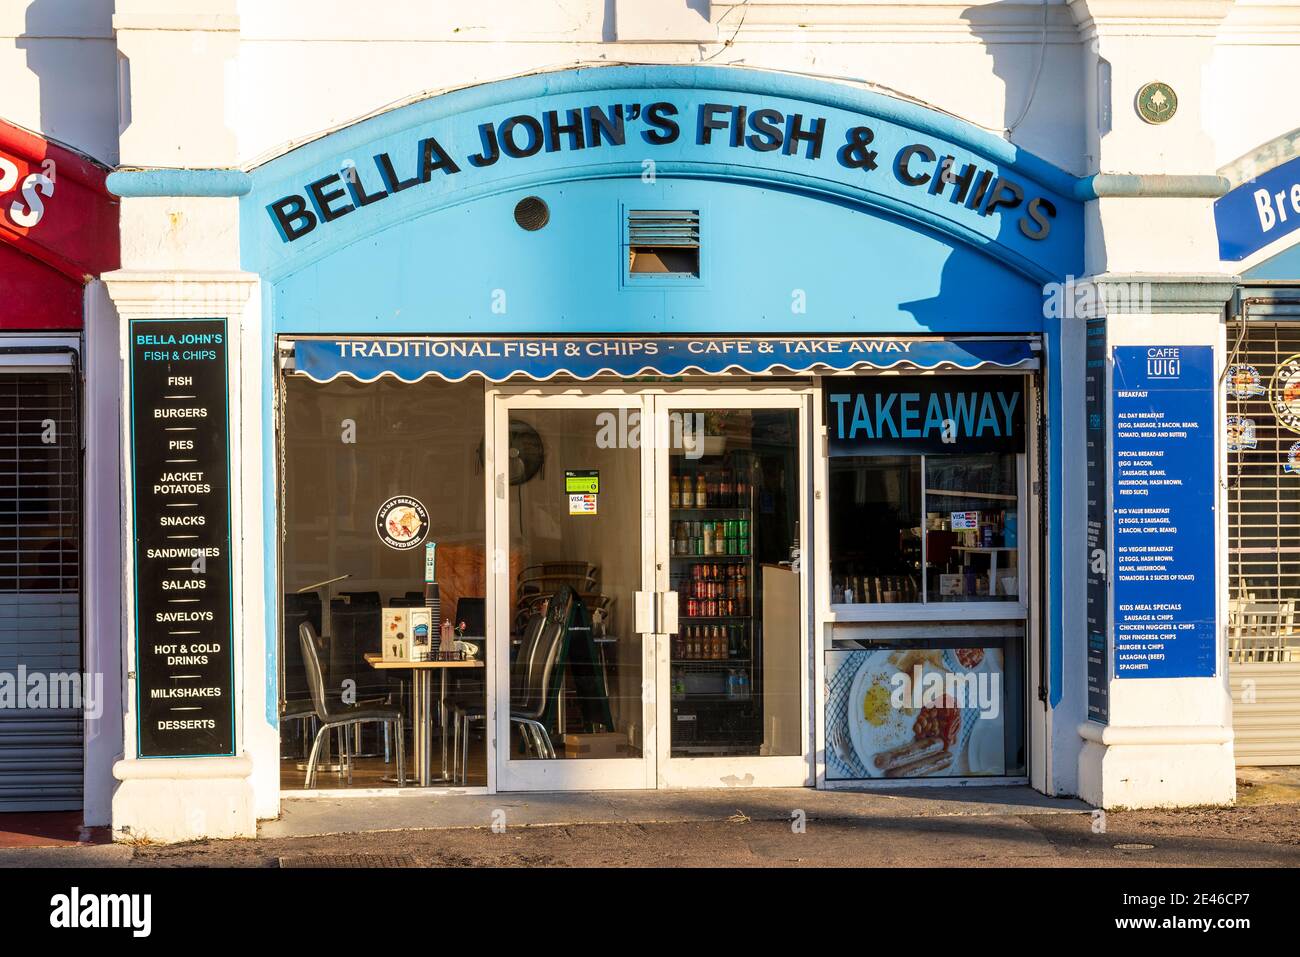 Bella John's Fish & Chips cafe and take away under the Pier arches in Southend on Sea Essex UK. Closed during COVID 19 lockdown Stock Photo